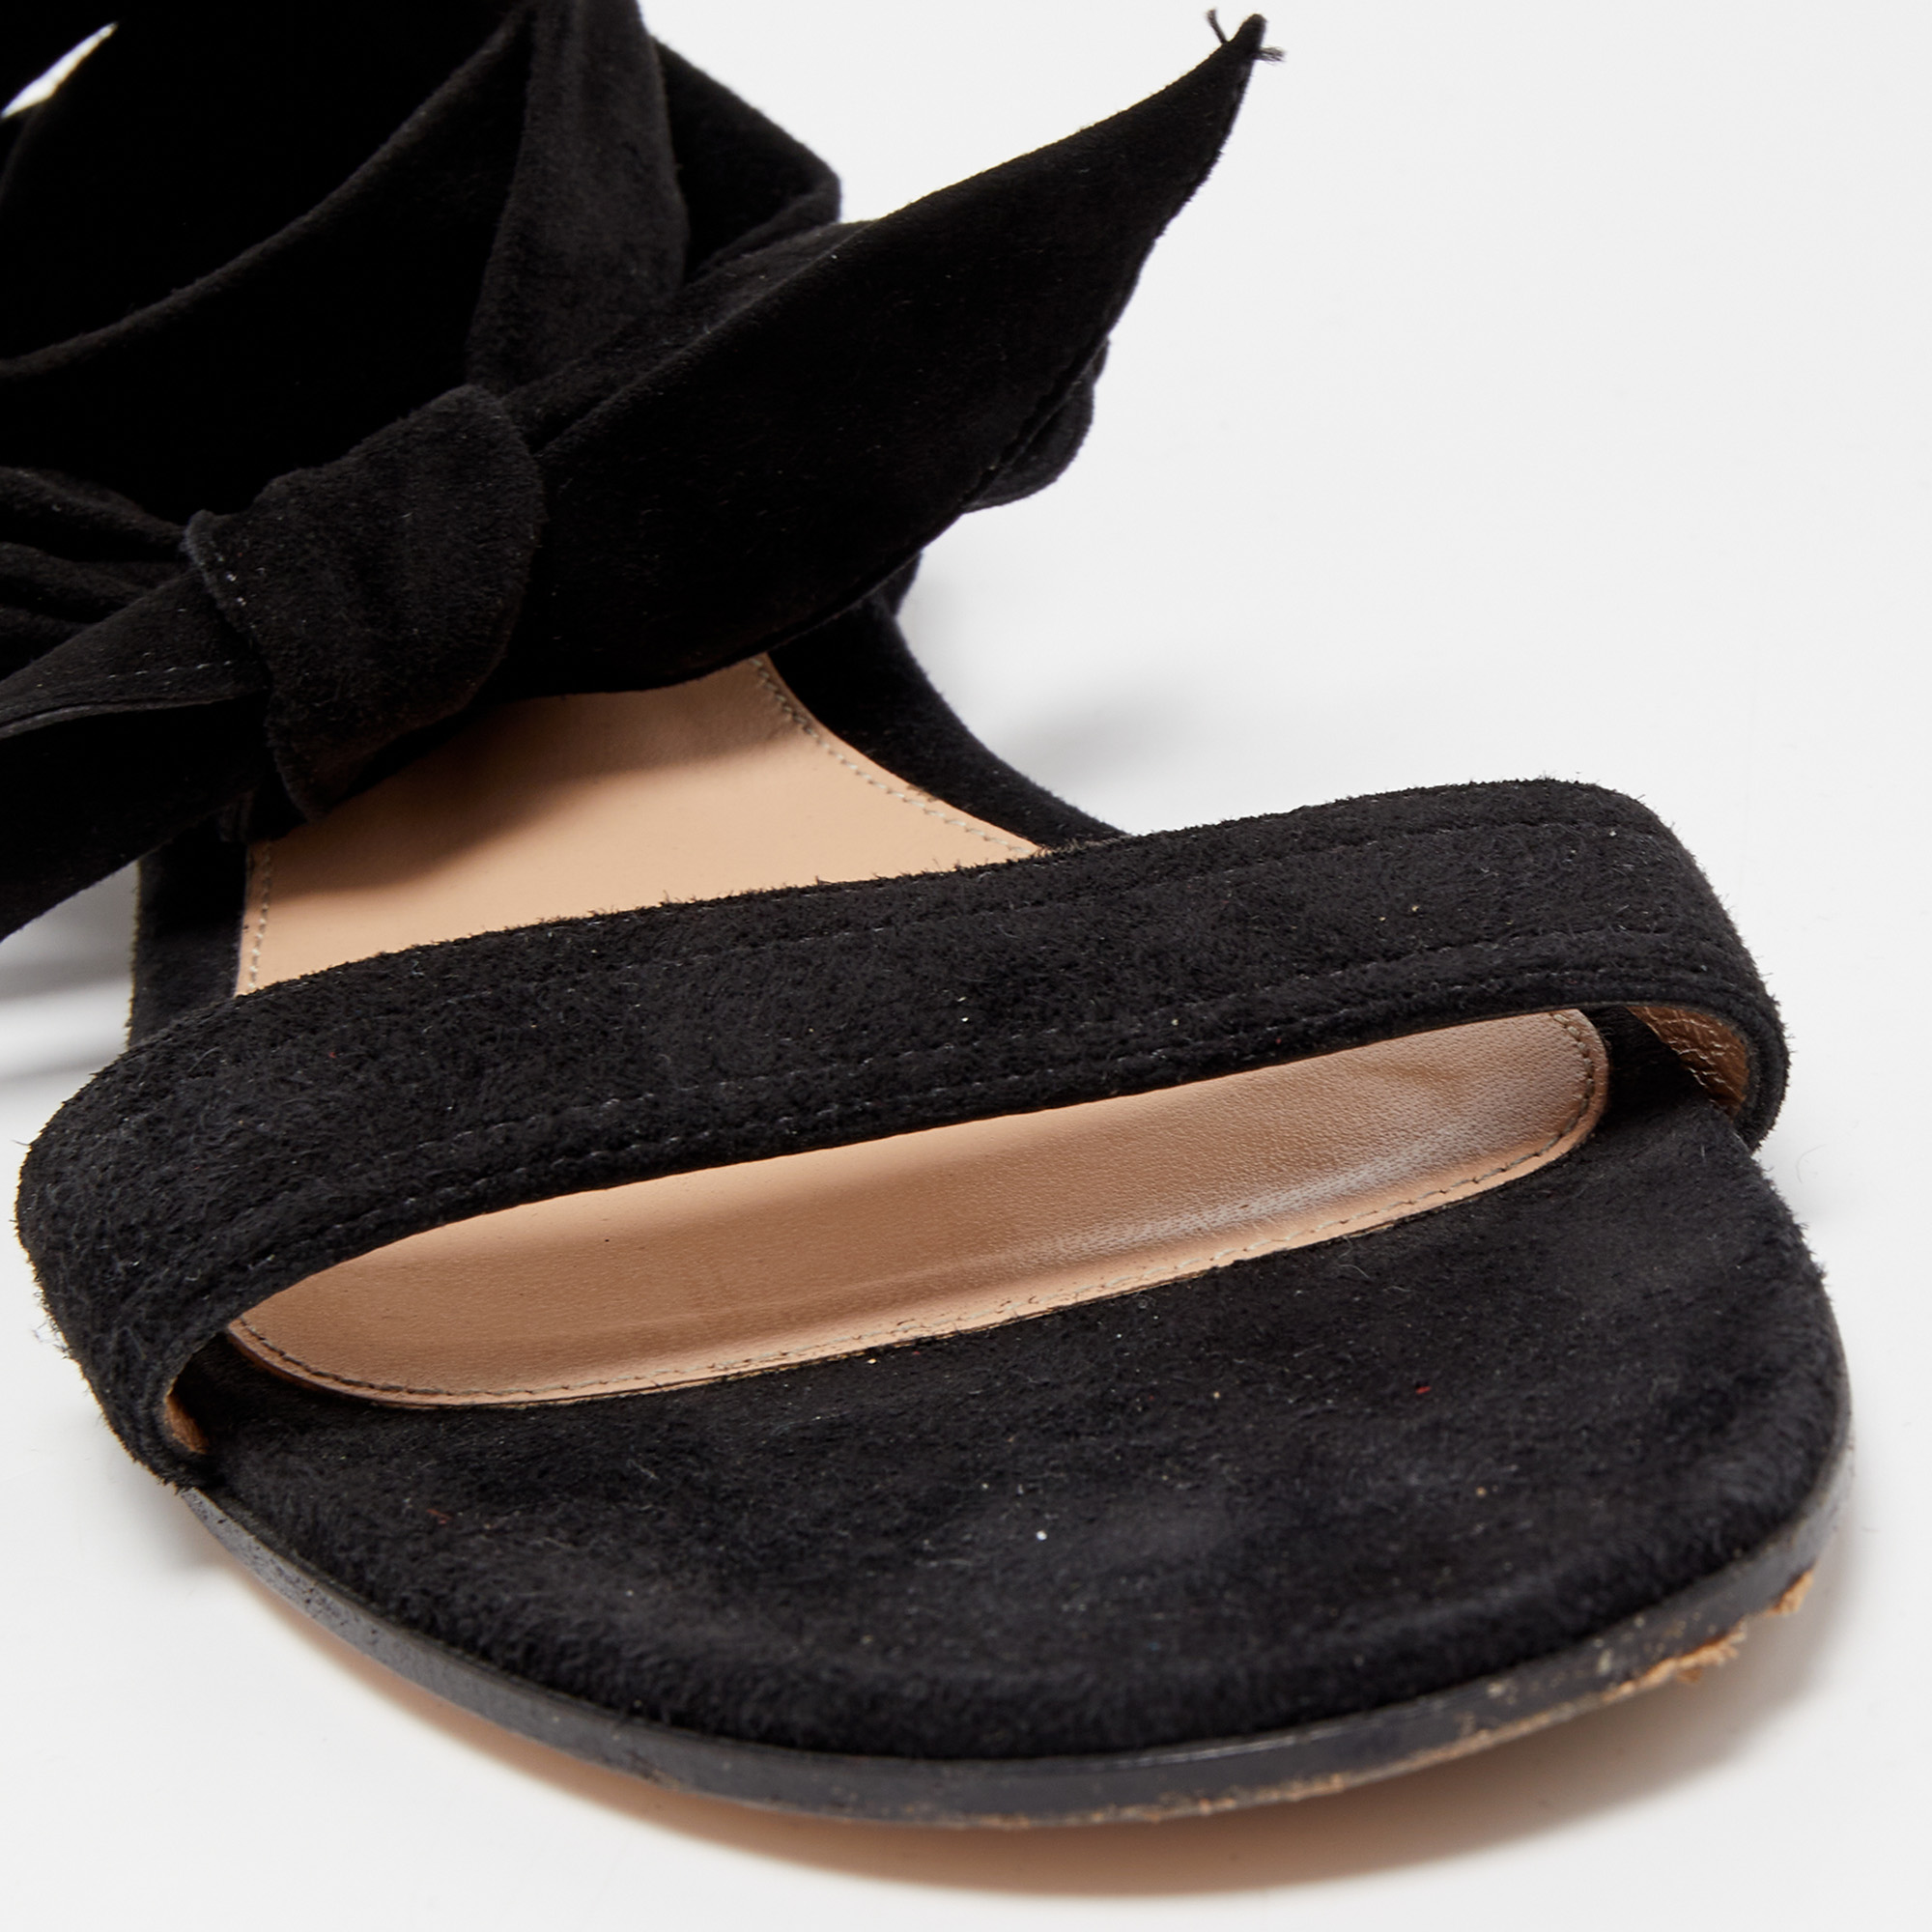 Gianvito Rossi Black Suede Ankle Wrap Flat Sandals Size 38.5